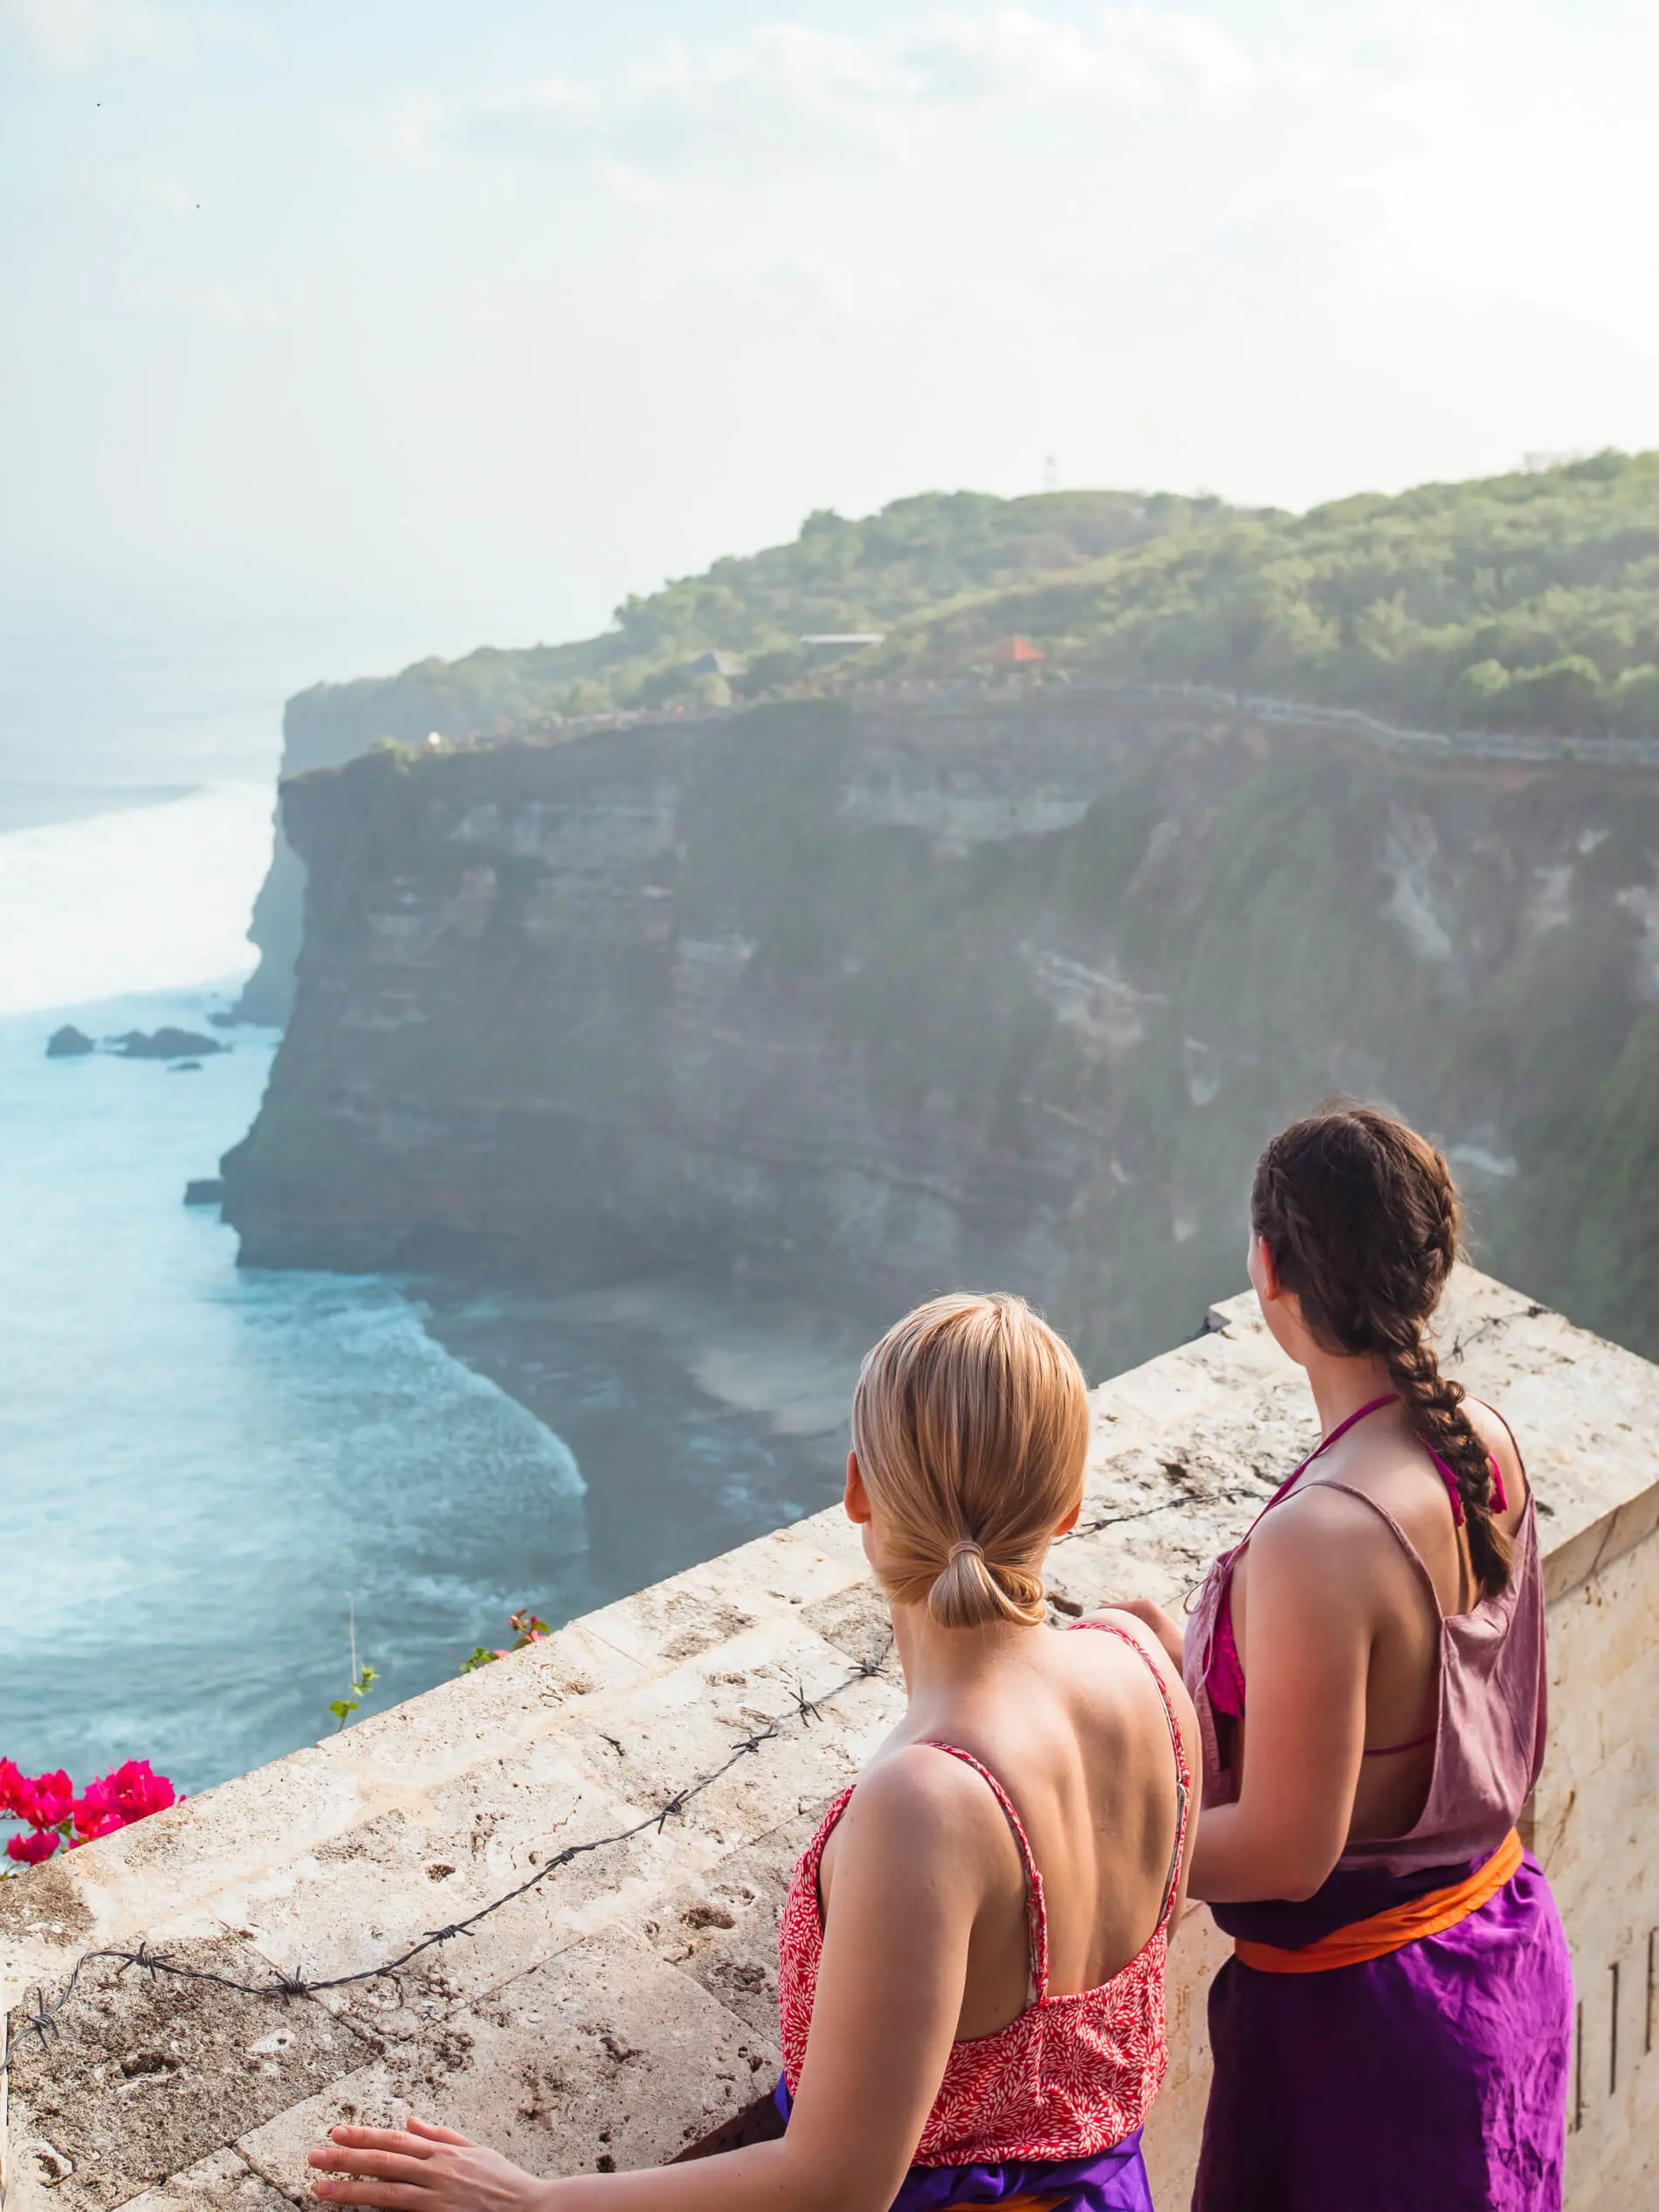 One blonde snd one brunette girl wearing purple sarongs looking over the wall at the ocean and surrounding cliffs at Uluwatu Temple.